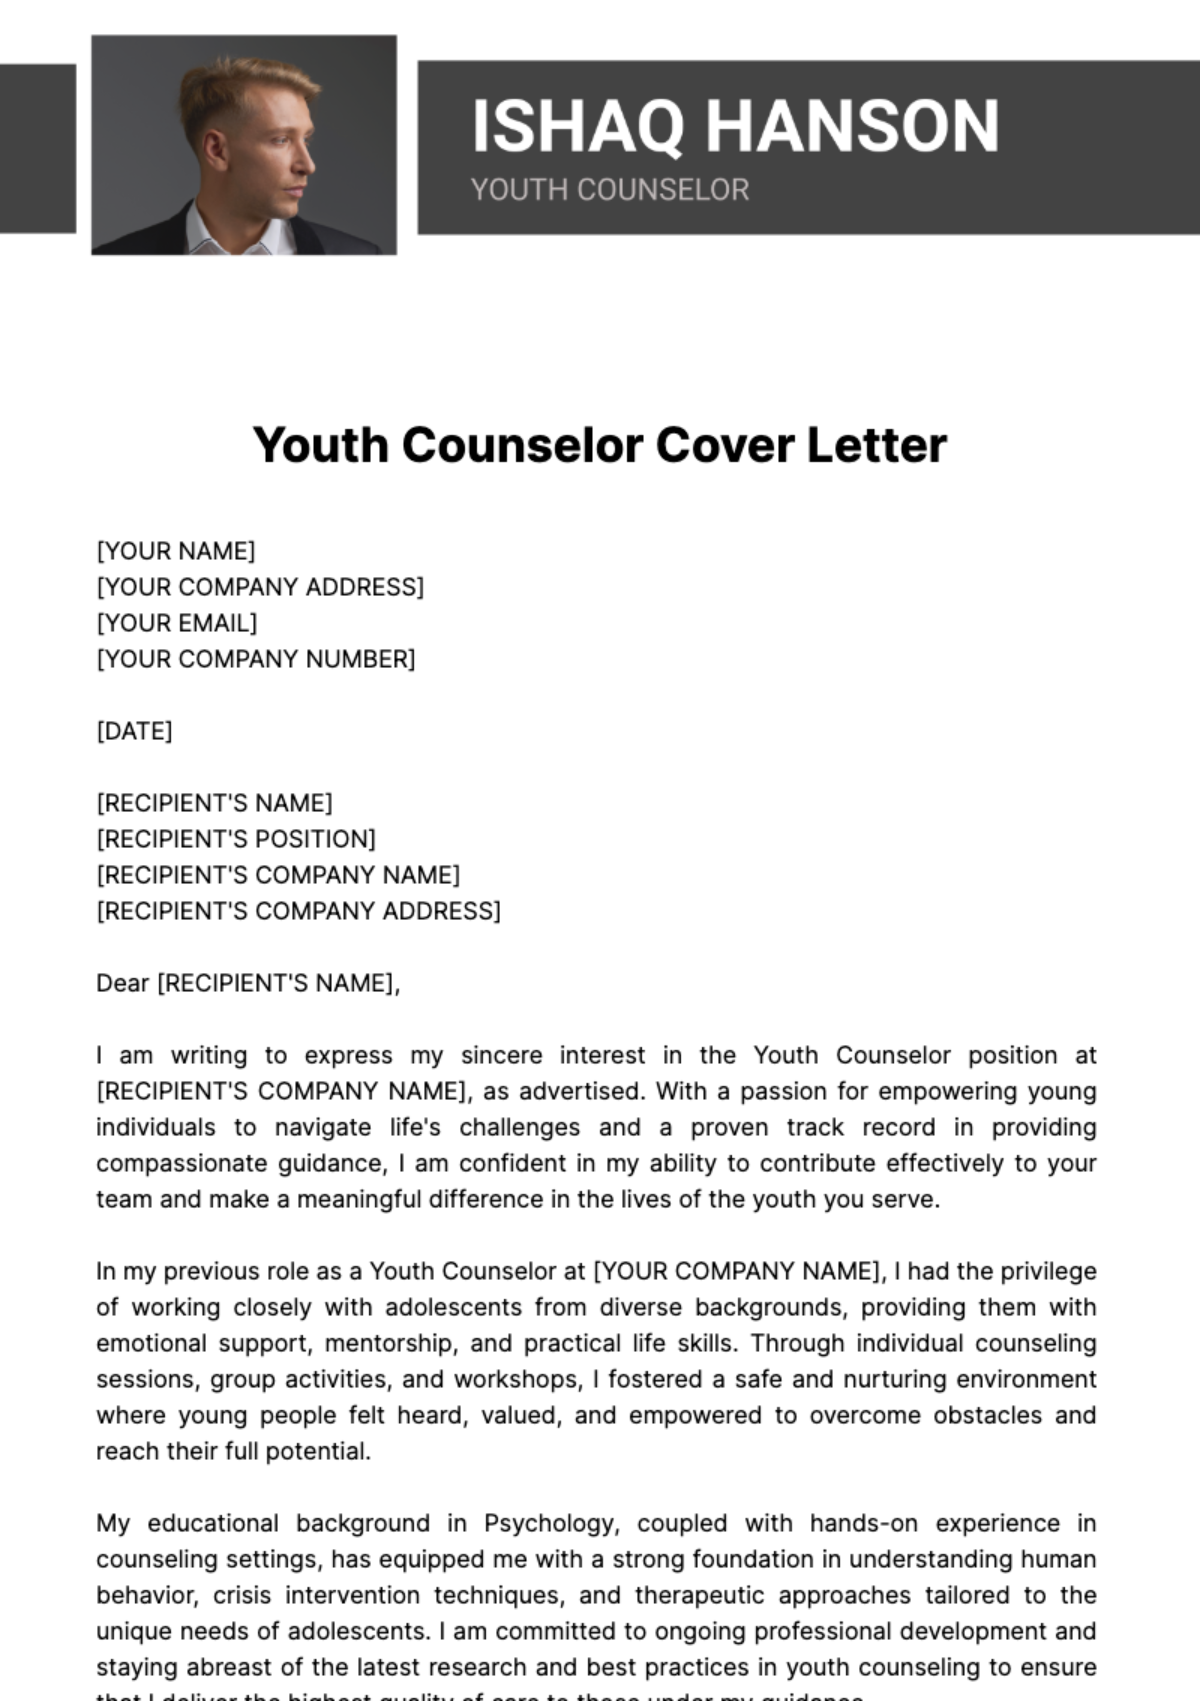 Youth Counselor Cover Letter Template